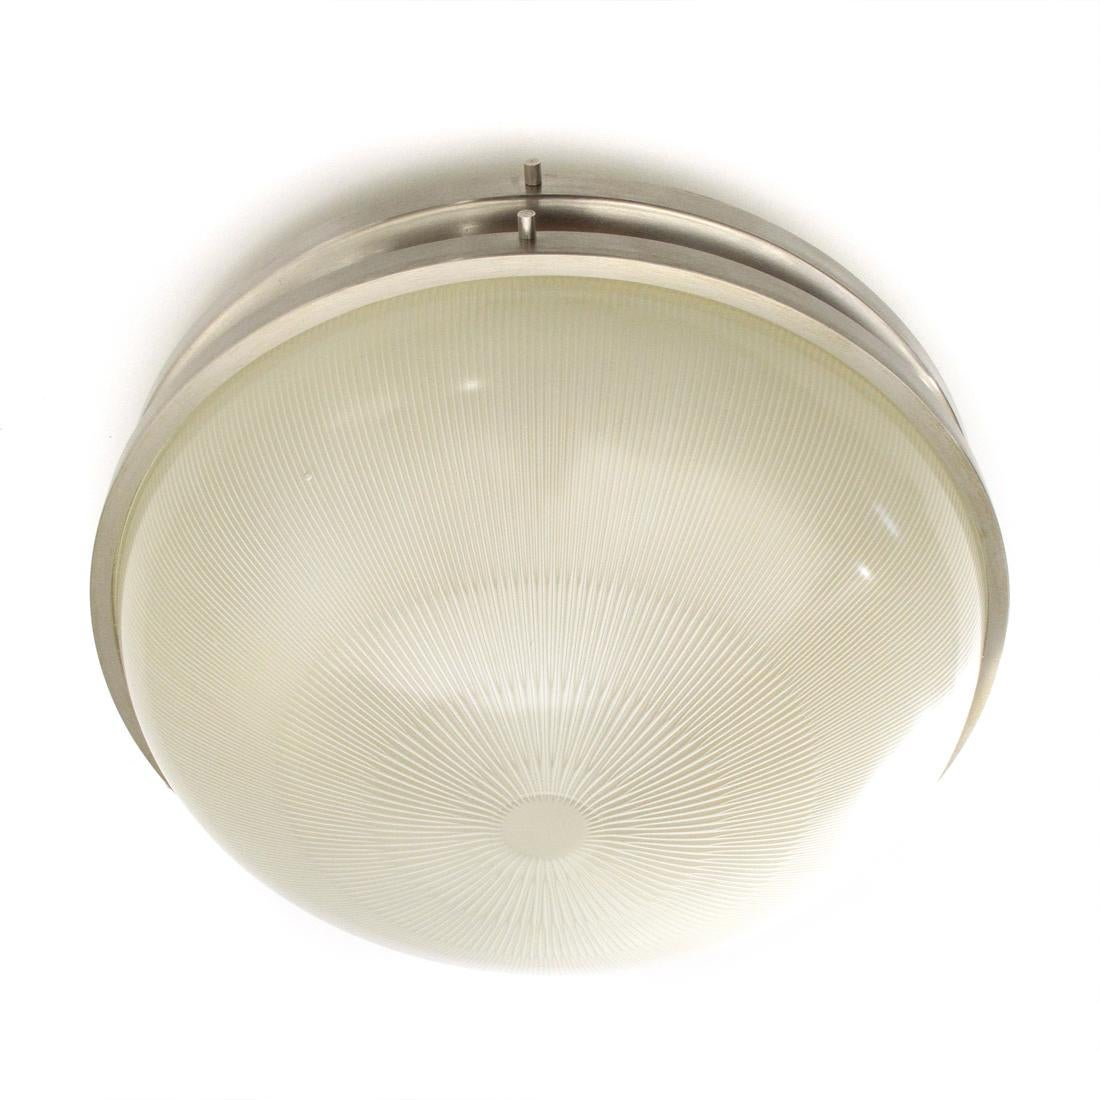 Ceiling lamp produced in the 1960s by Artemide on a project by Sergio Mazza.
Matt nickel plated brass body.
Printed crystal diffuser.
Good general condition, some signs due to normal use over time.

Dimensions: Diameter 36 cm, height 17 cm.